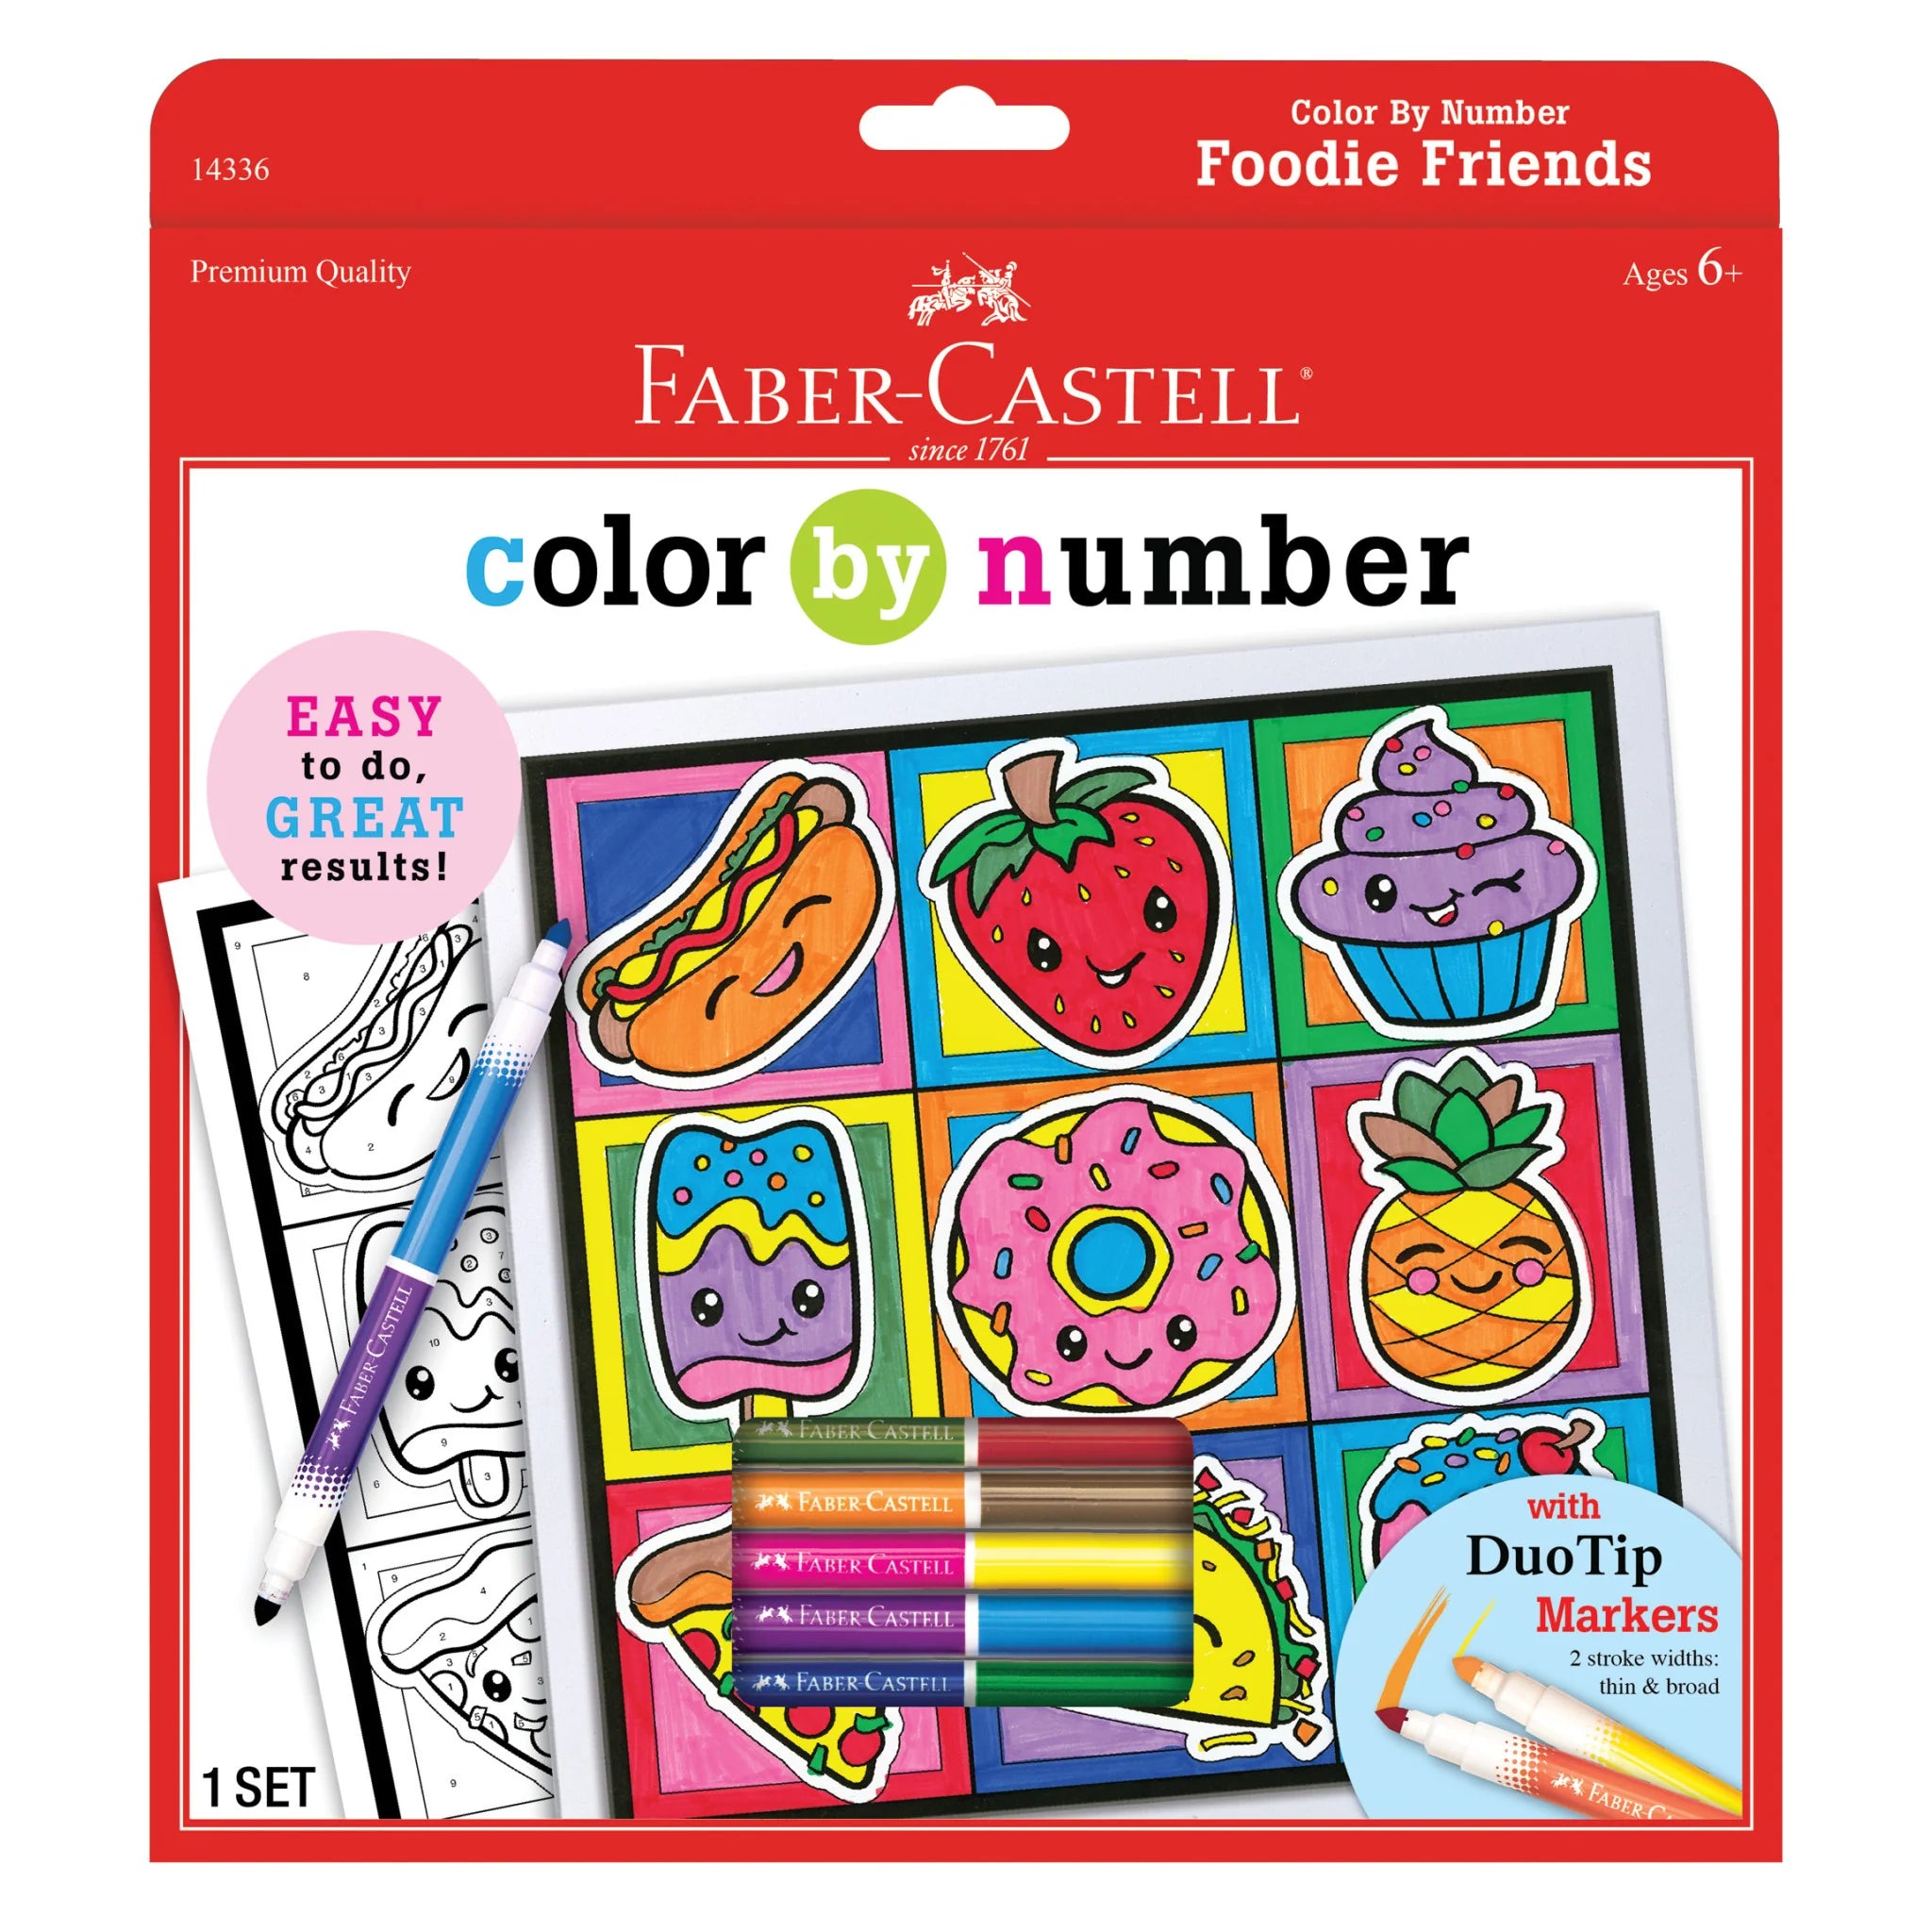 Color by Number: Foodie Friends by Faber-Castell #14336